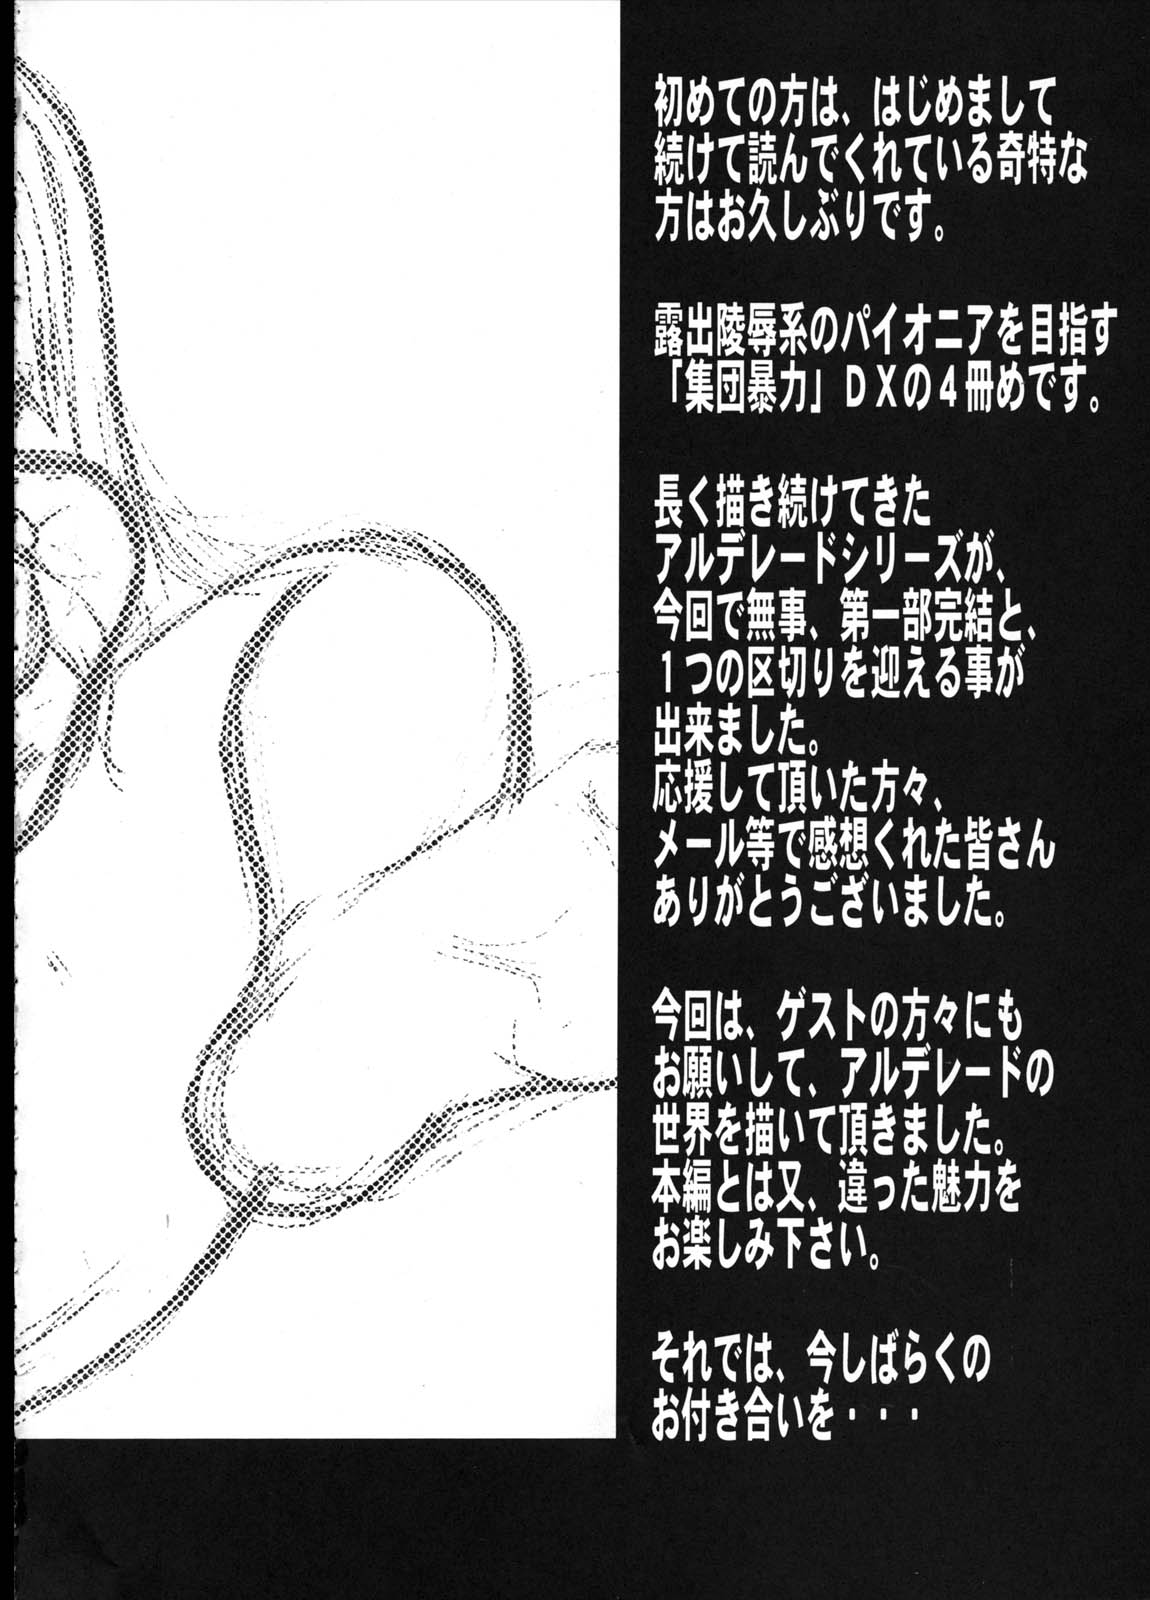 (C66) [Shuudan Bouryoku (Various)] File/12 Record of Aldelayd - EXHIBITION DX4 page 7 full